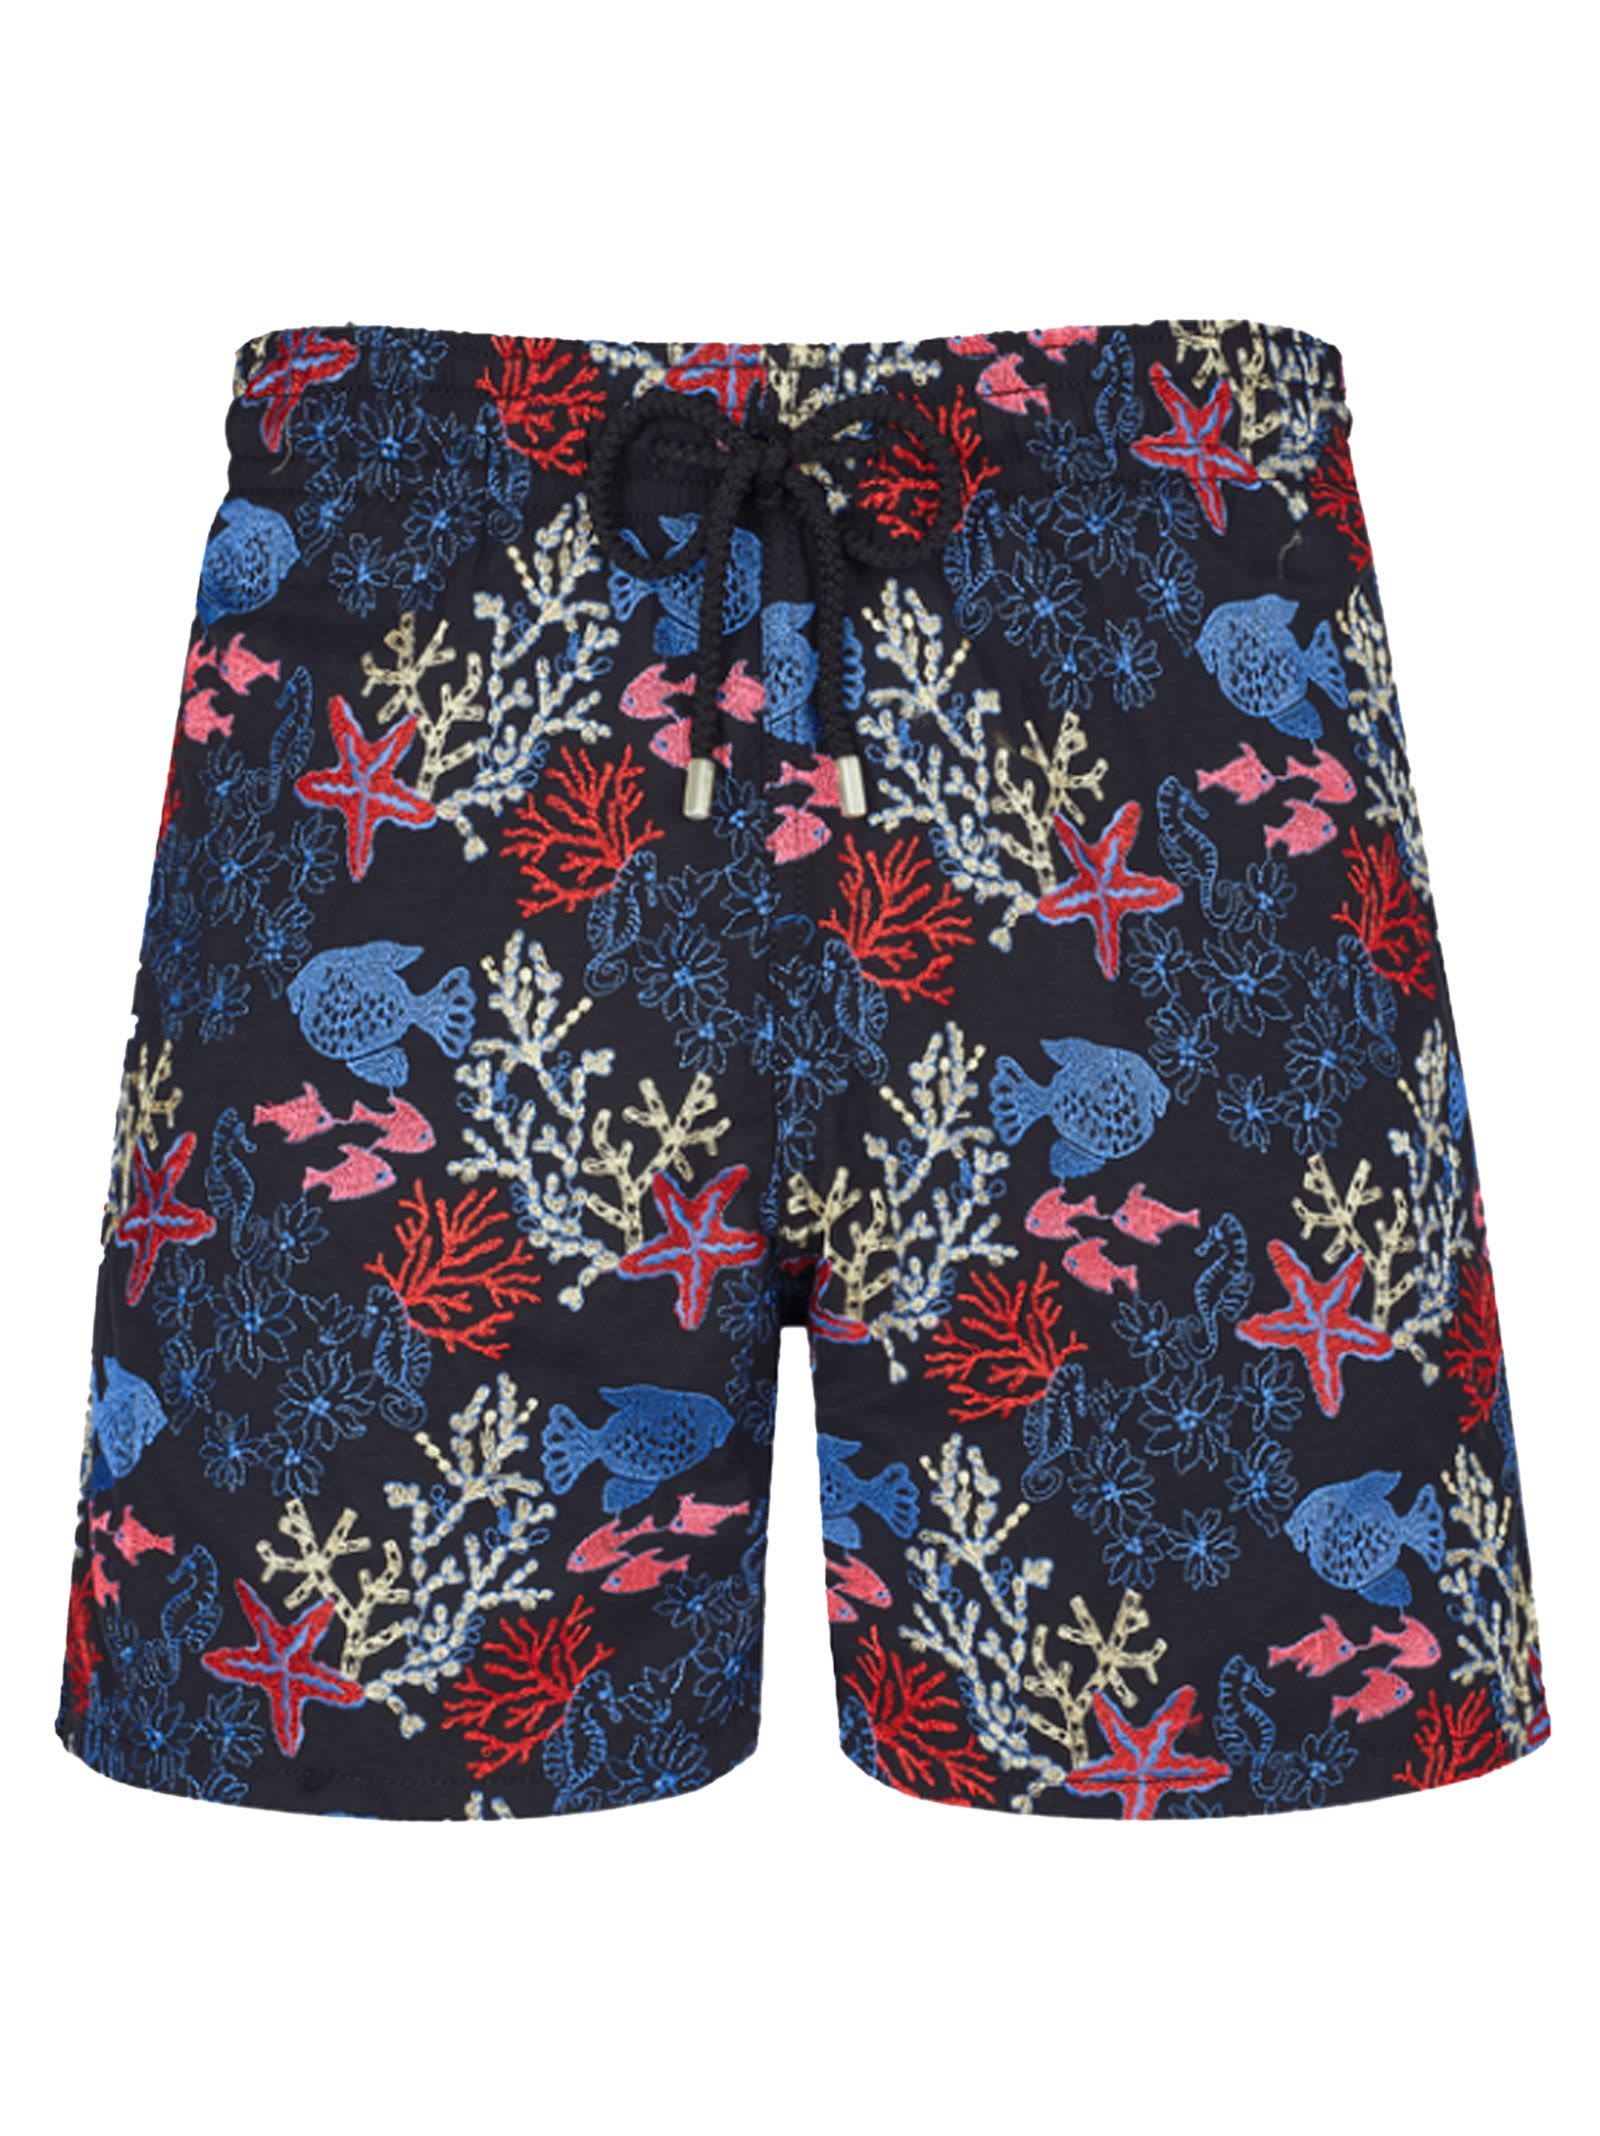 VILEBREQUIN FOND MARINS EMBROIDERED MENS BEACH SHORTS - LIMITED EDITION